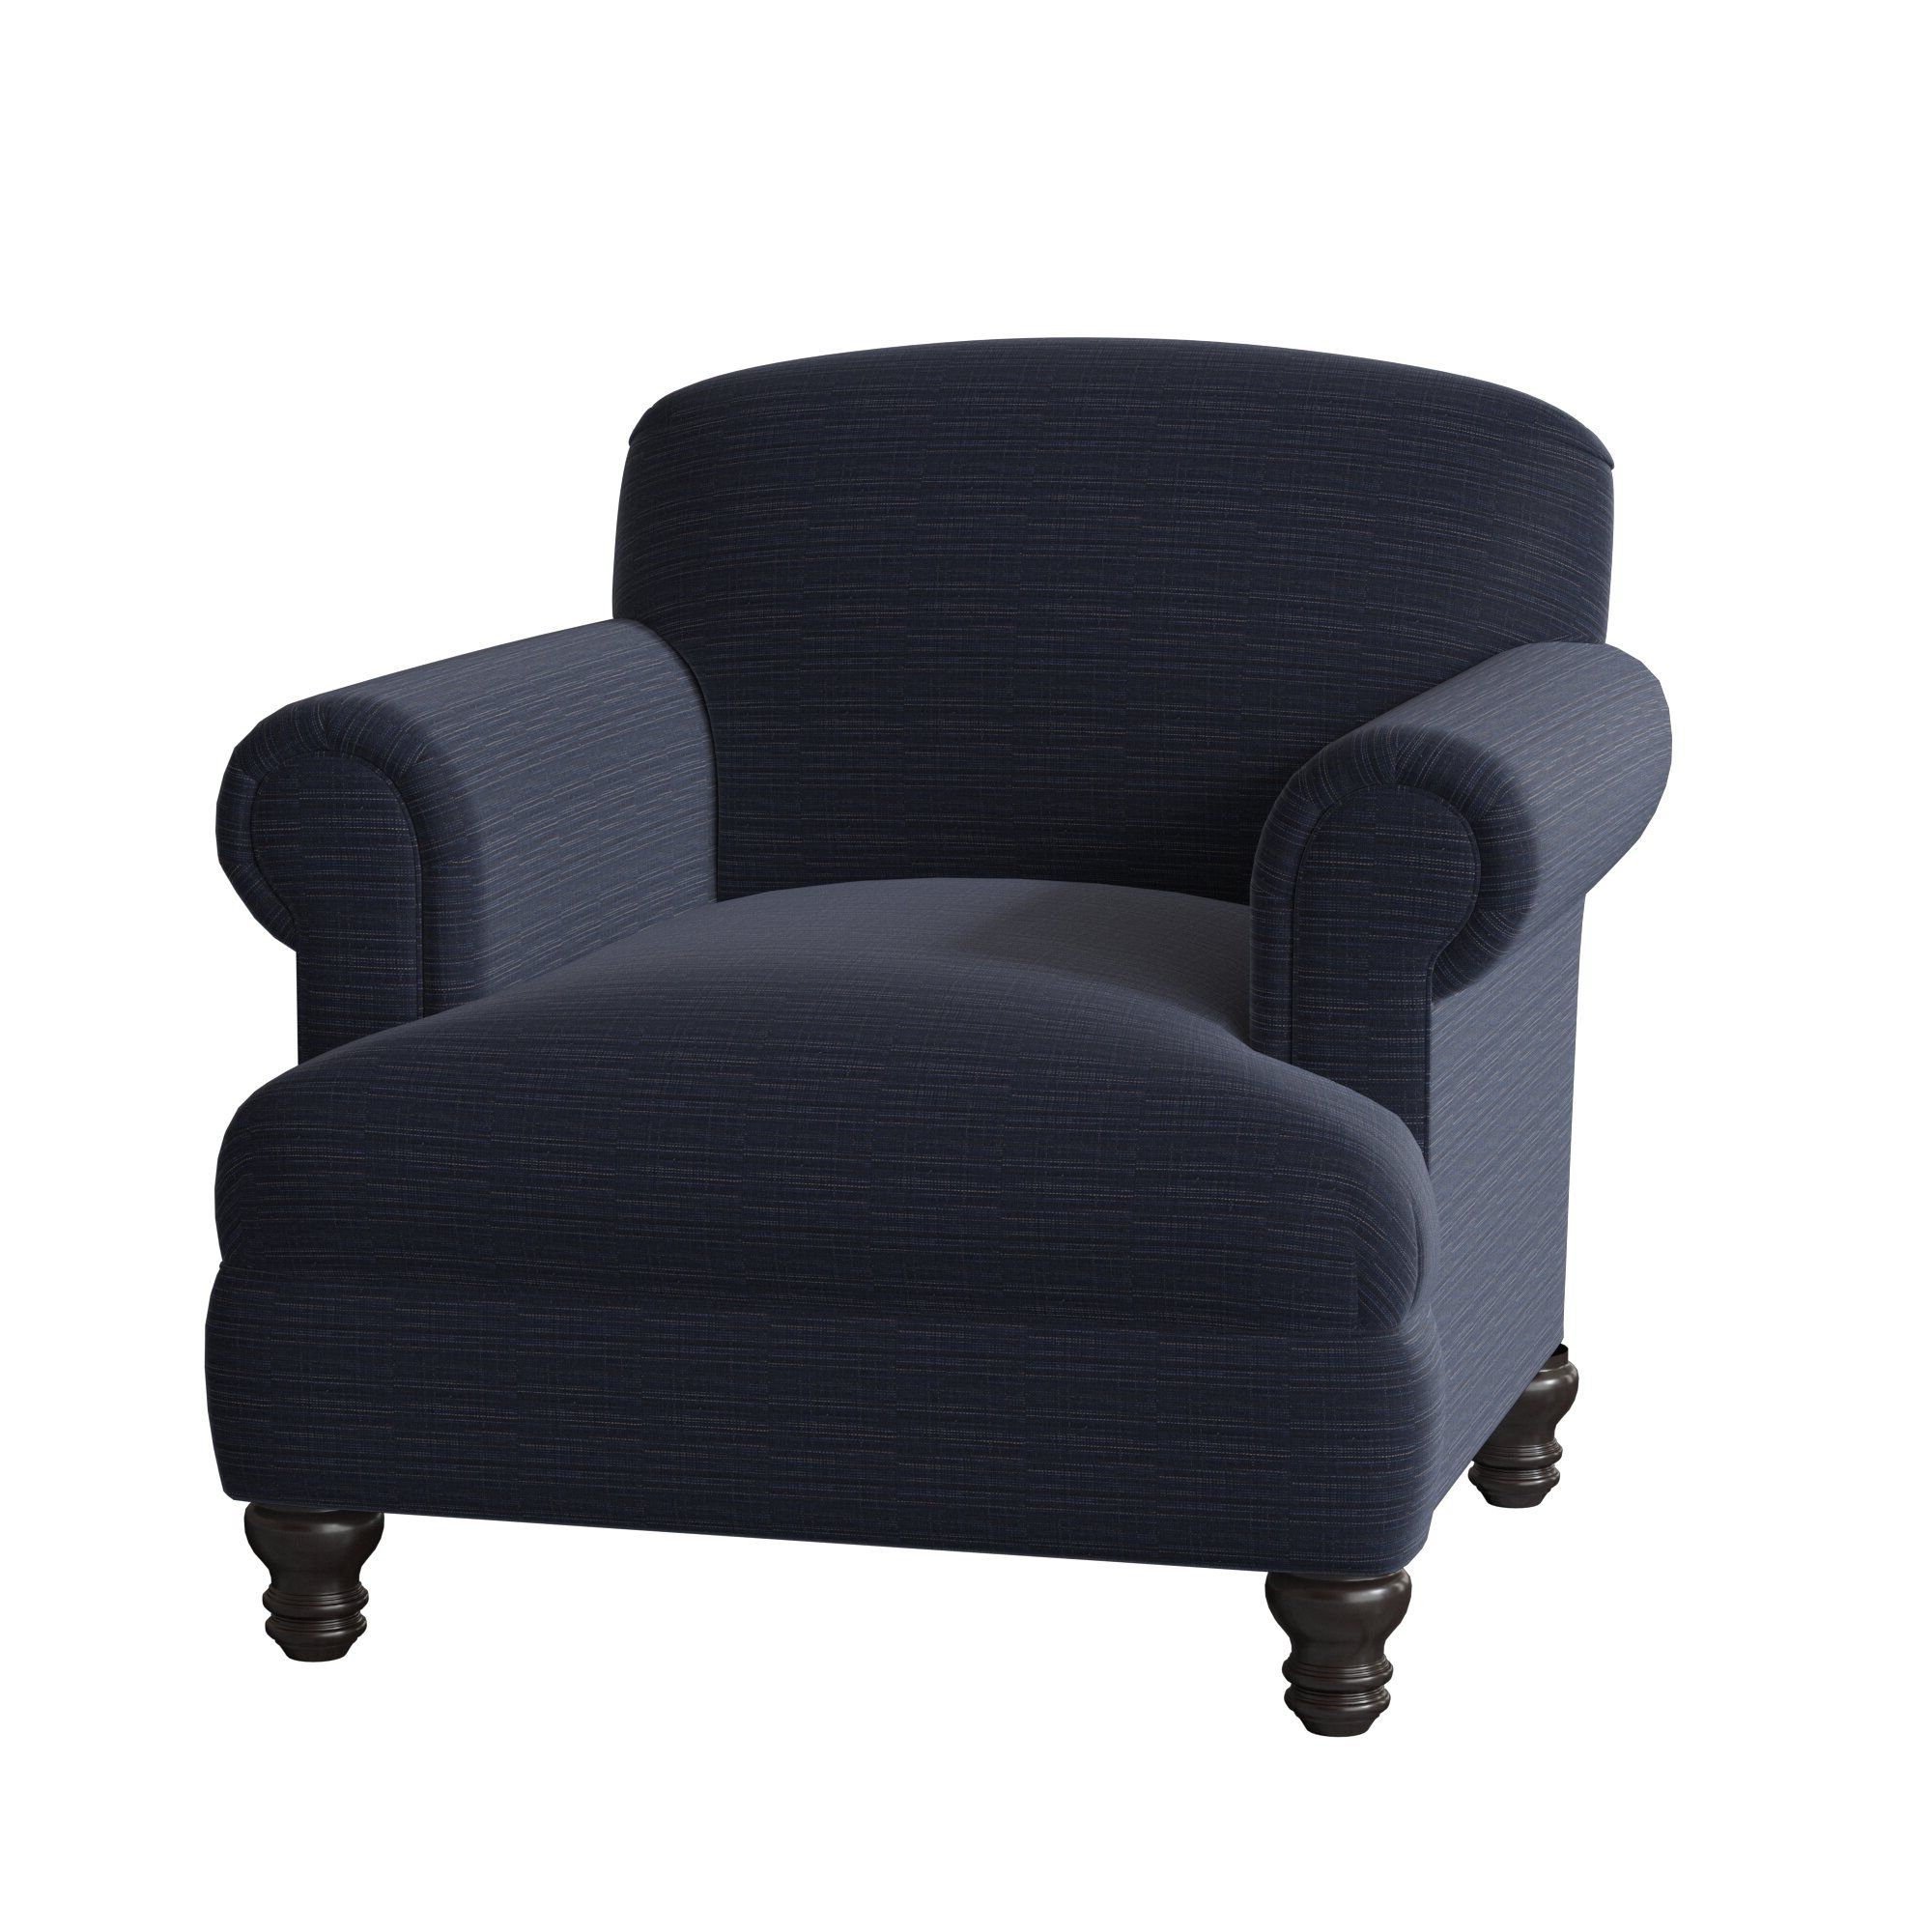 Widely Used Murphy Armchair & Reviews (View 7 of 20)